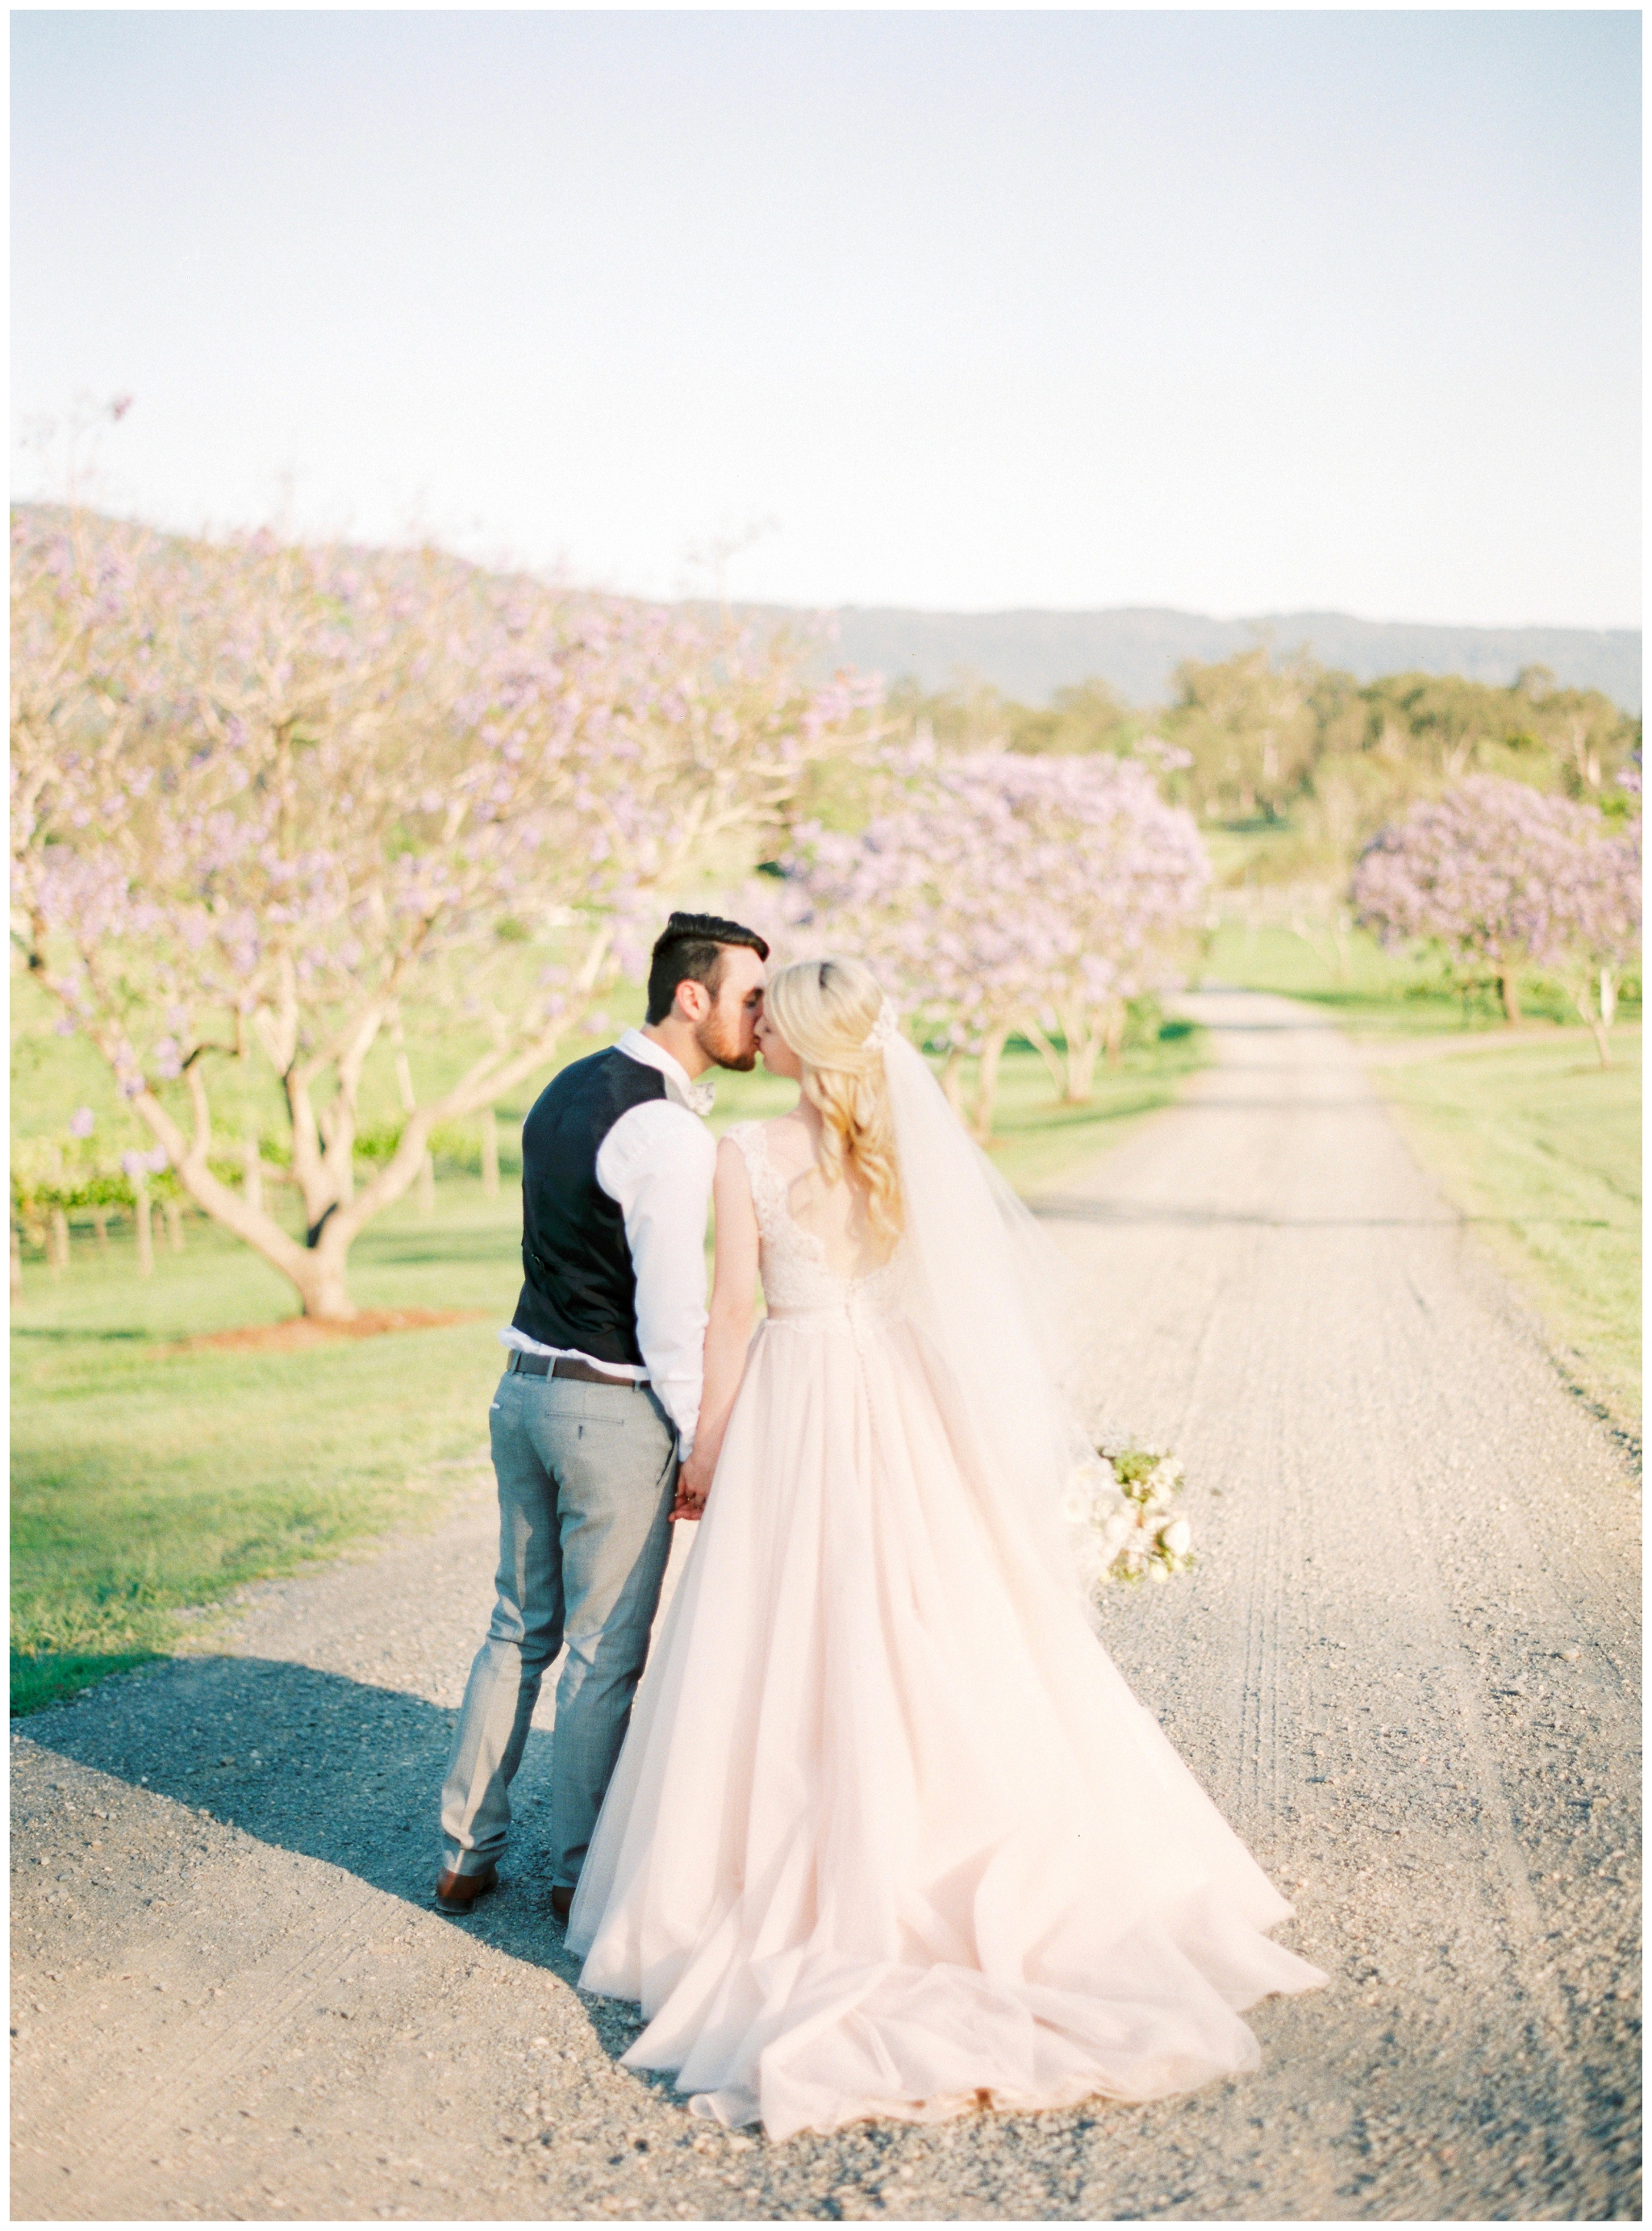 Tegan and Alex Wedding at Albert River Wines by Casey Jane Photography 48